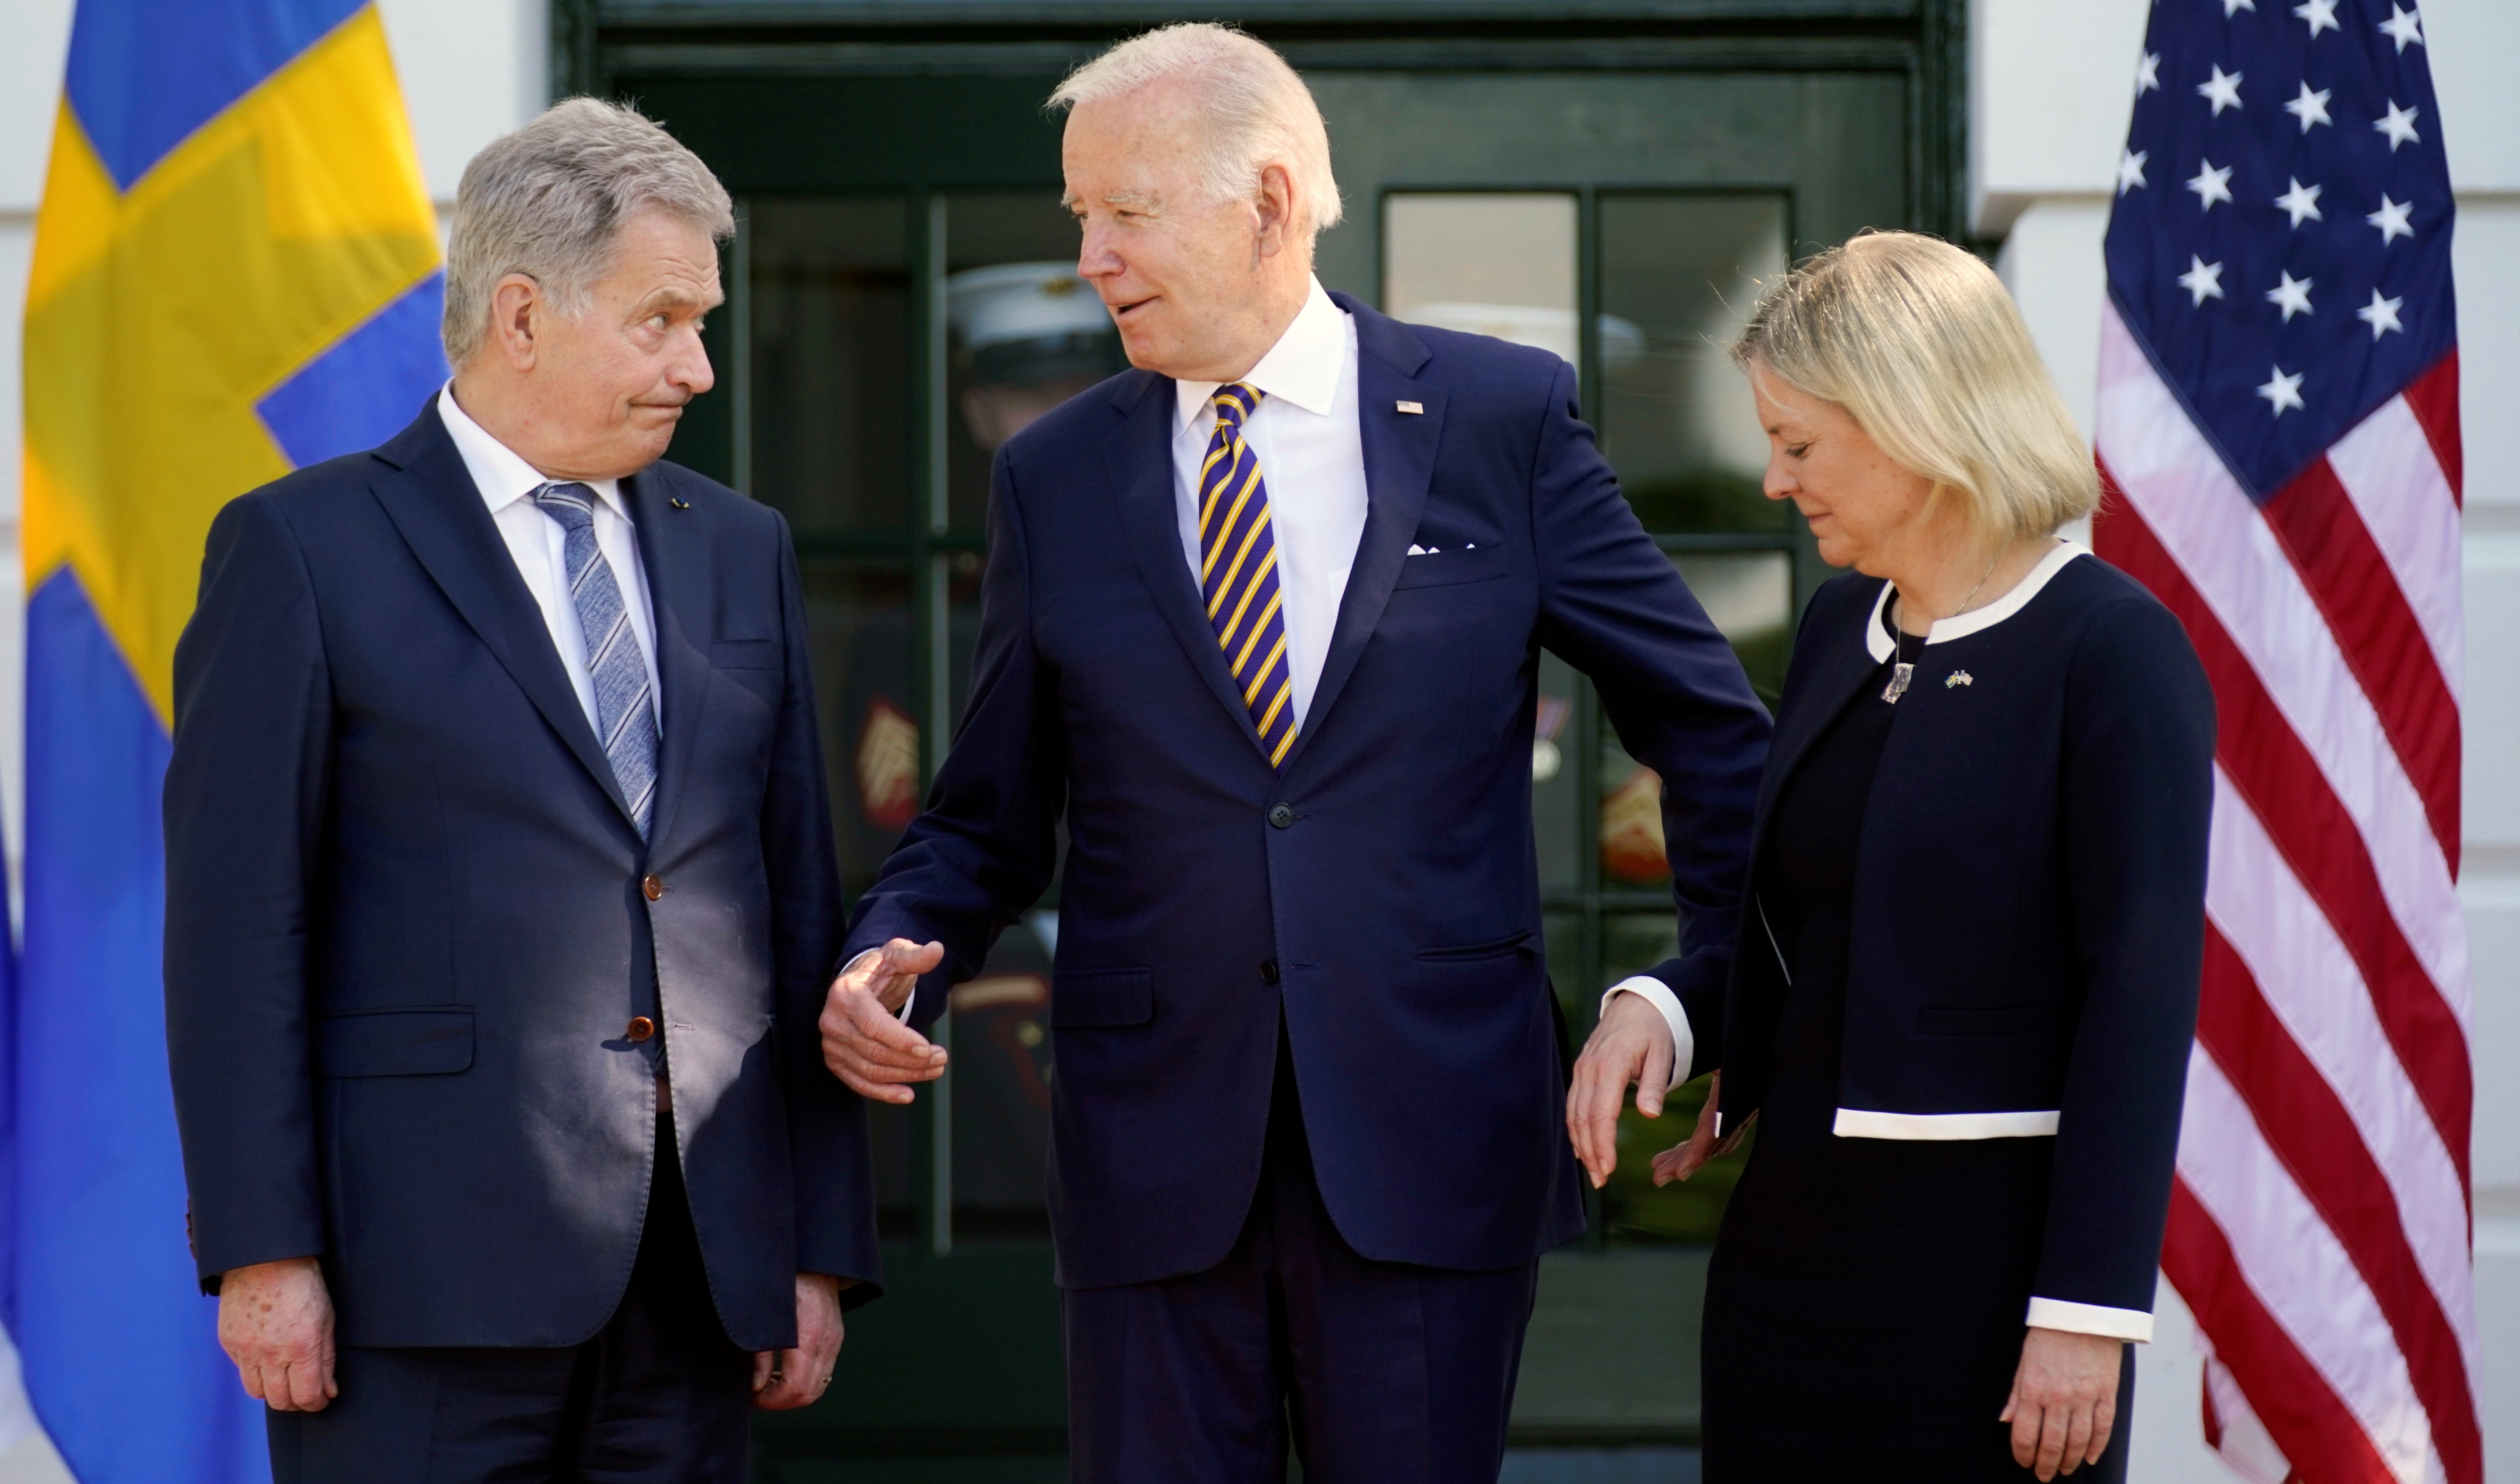 Biden throws full support of US behind Finland, Sweden NATO applications